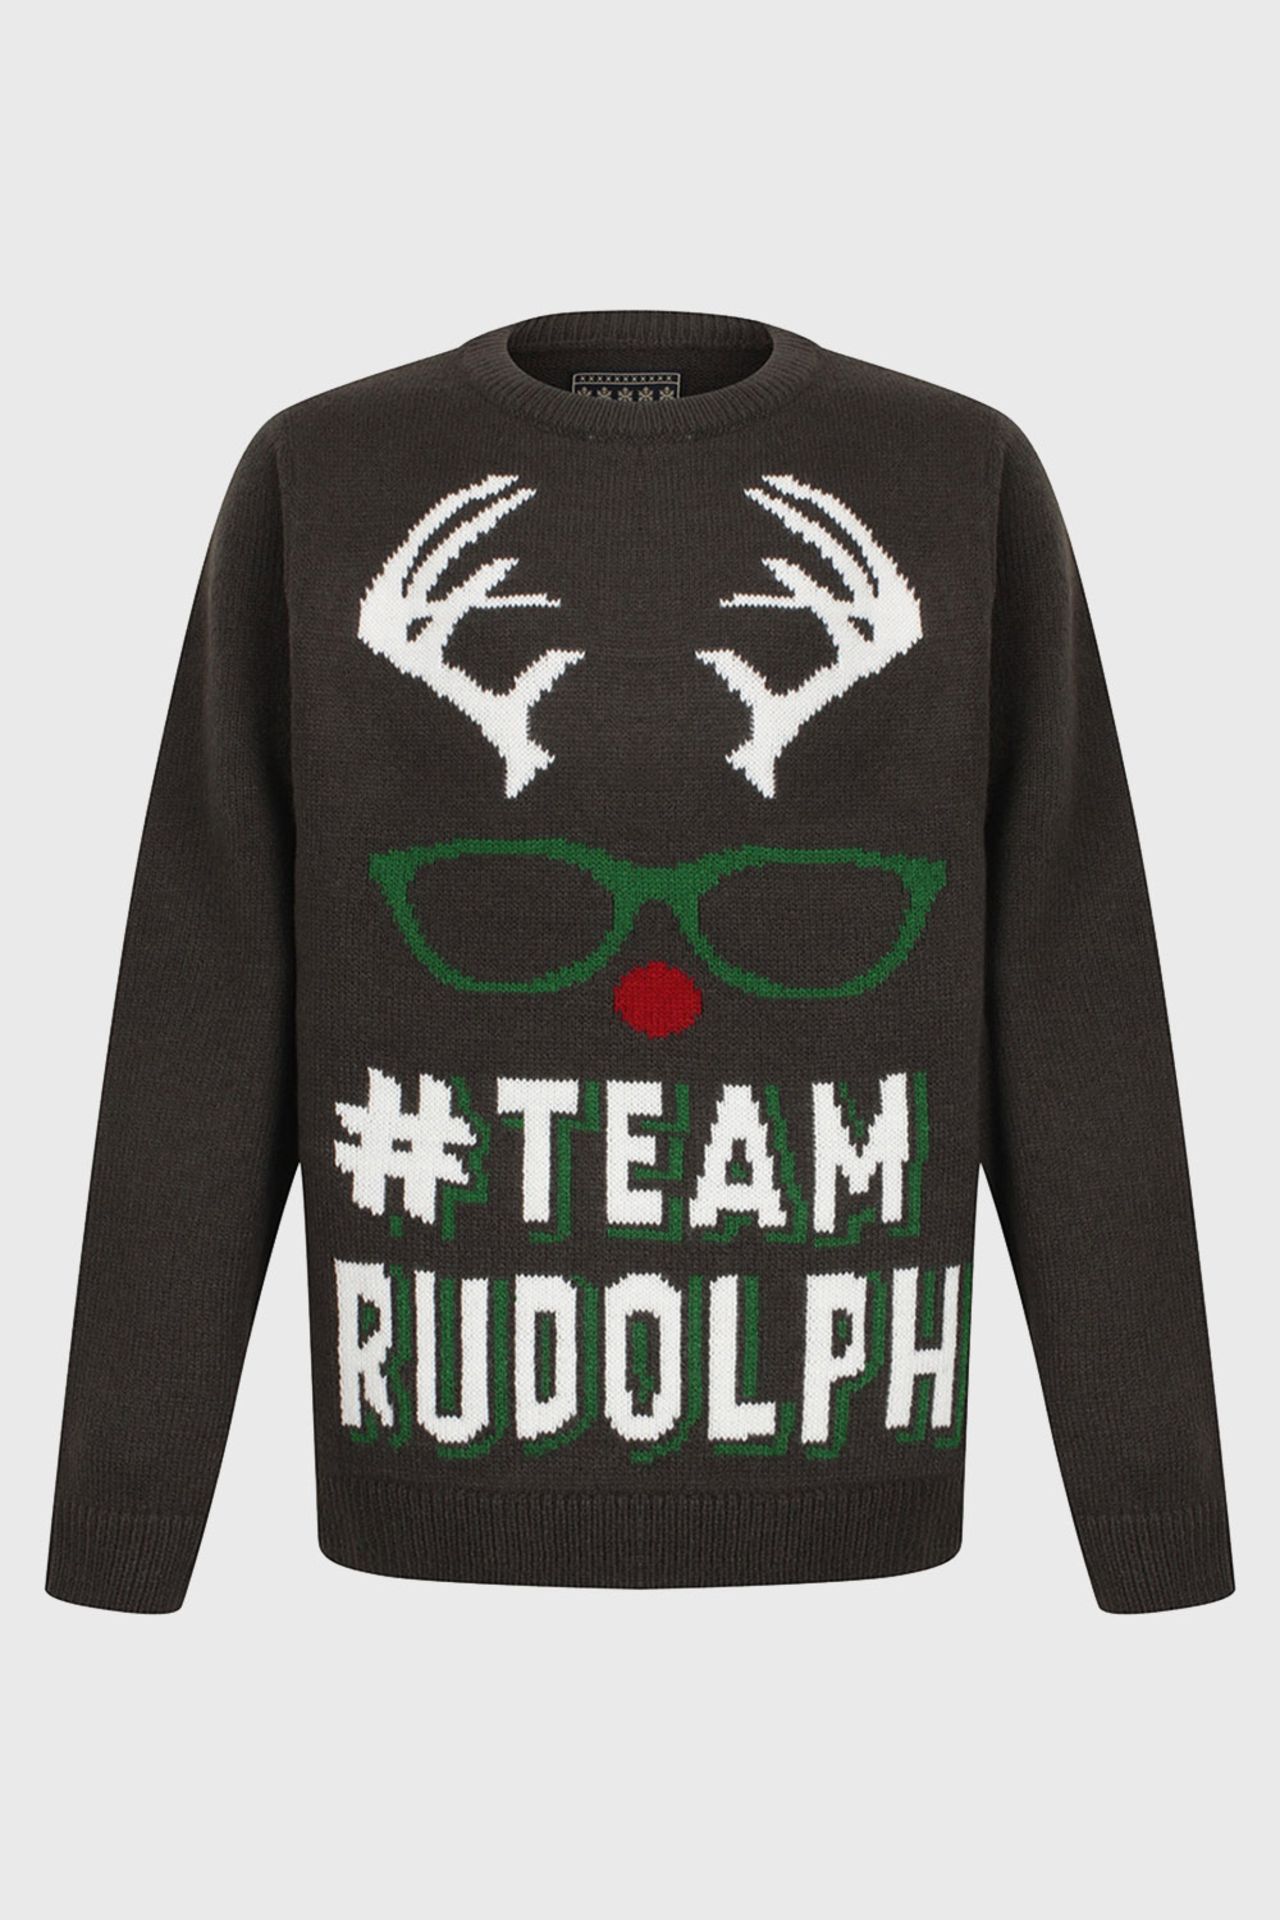 31 X BRAND NEW NOVELTY FESTIVE JUMPERS IE. ICE BABY (L-8), SNOW SCENE RUDOLPH (XXL-3, XL-4, L-6, M- - Image 2 of 2